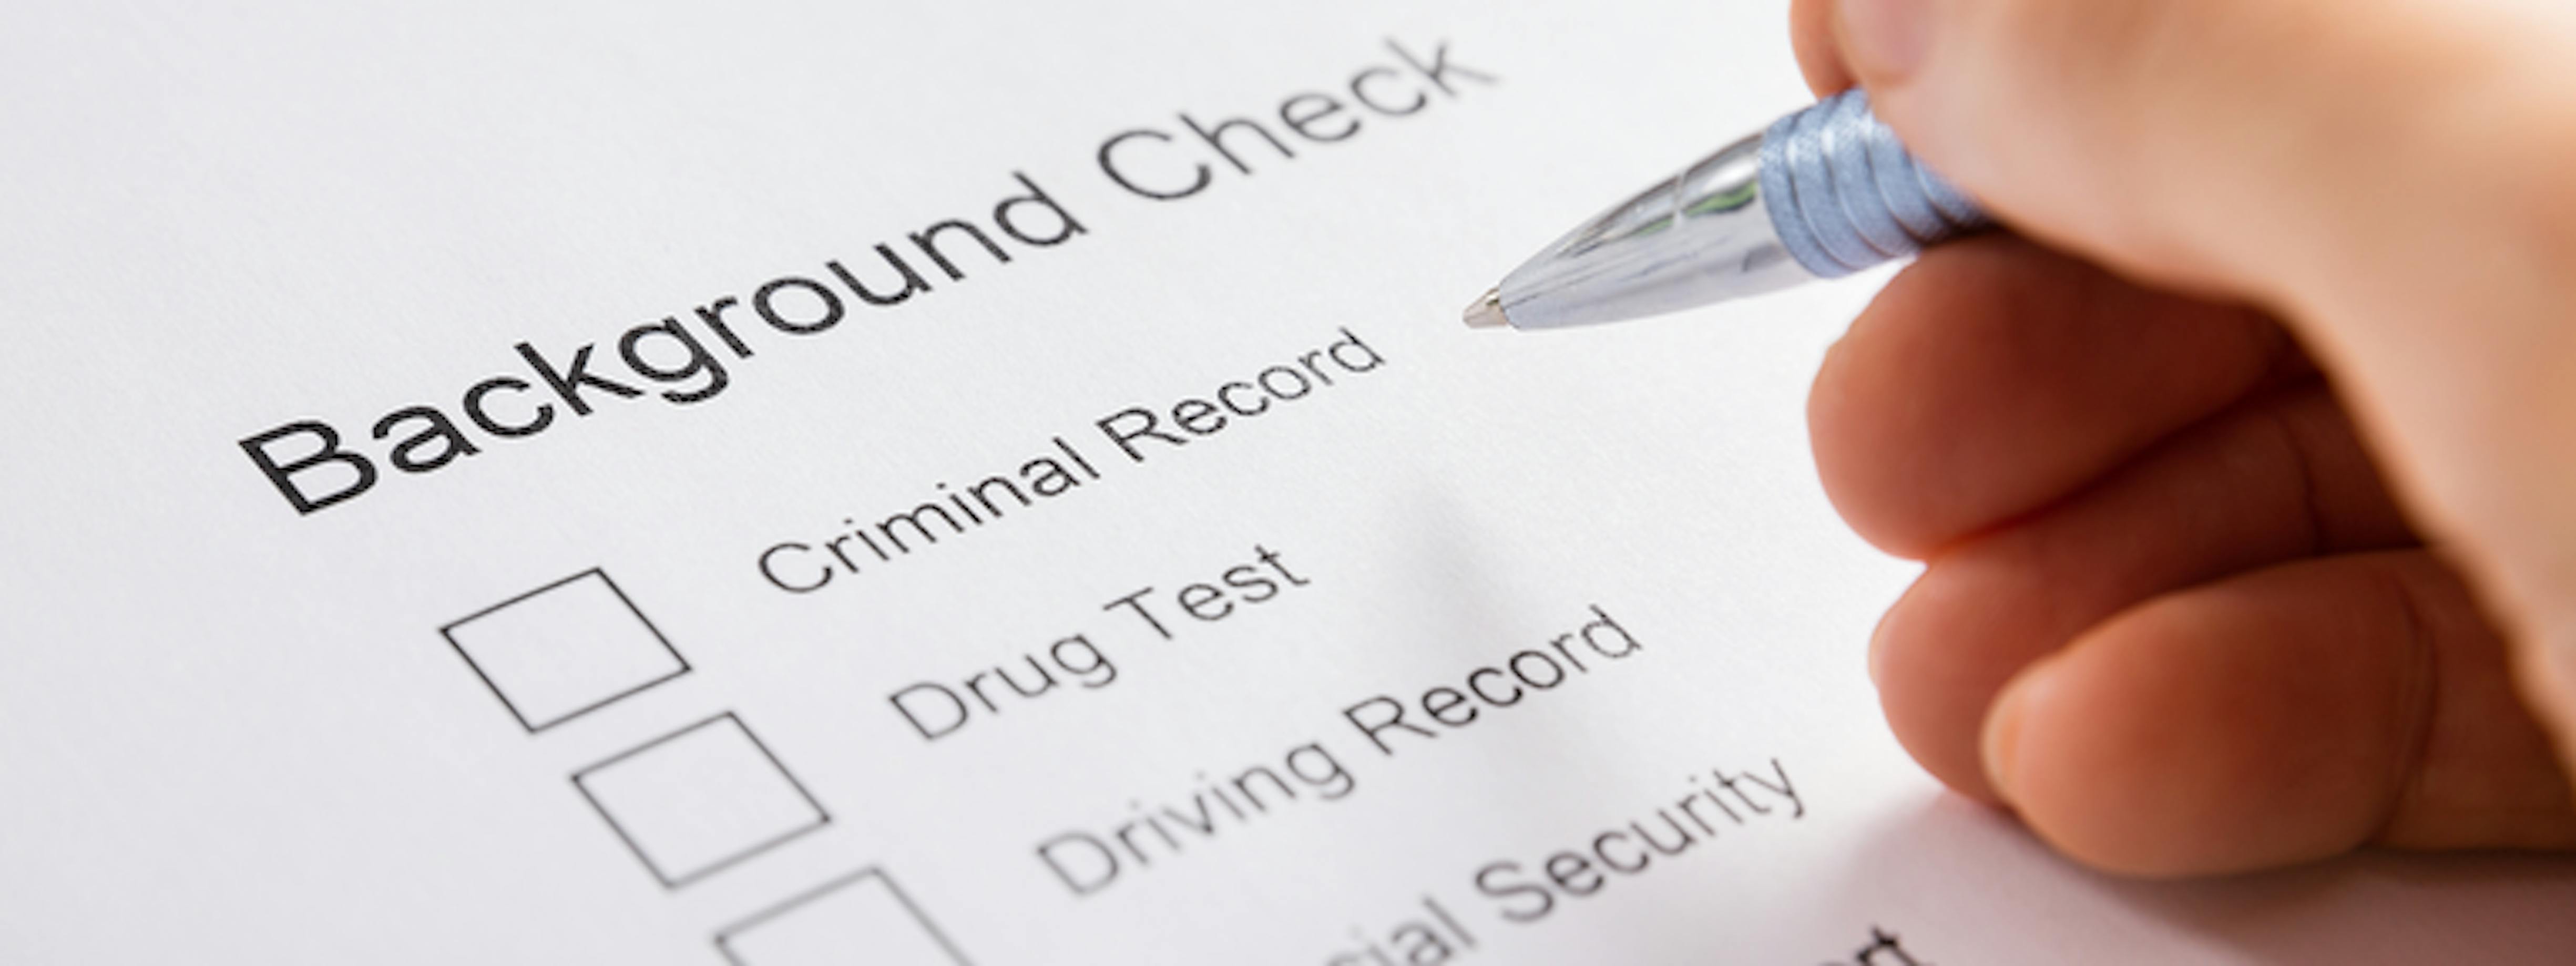 Job background checks conducted